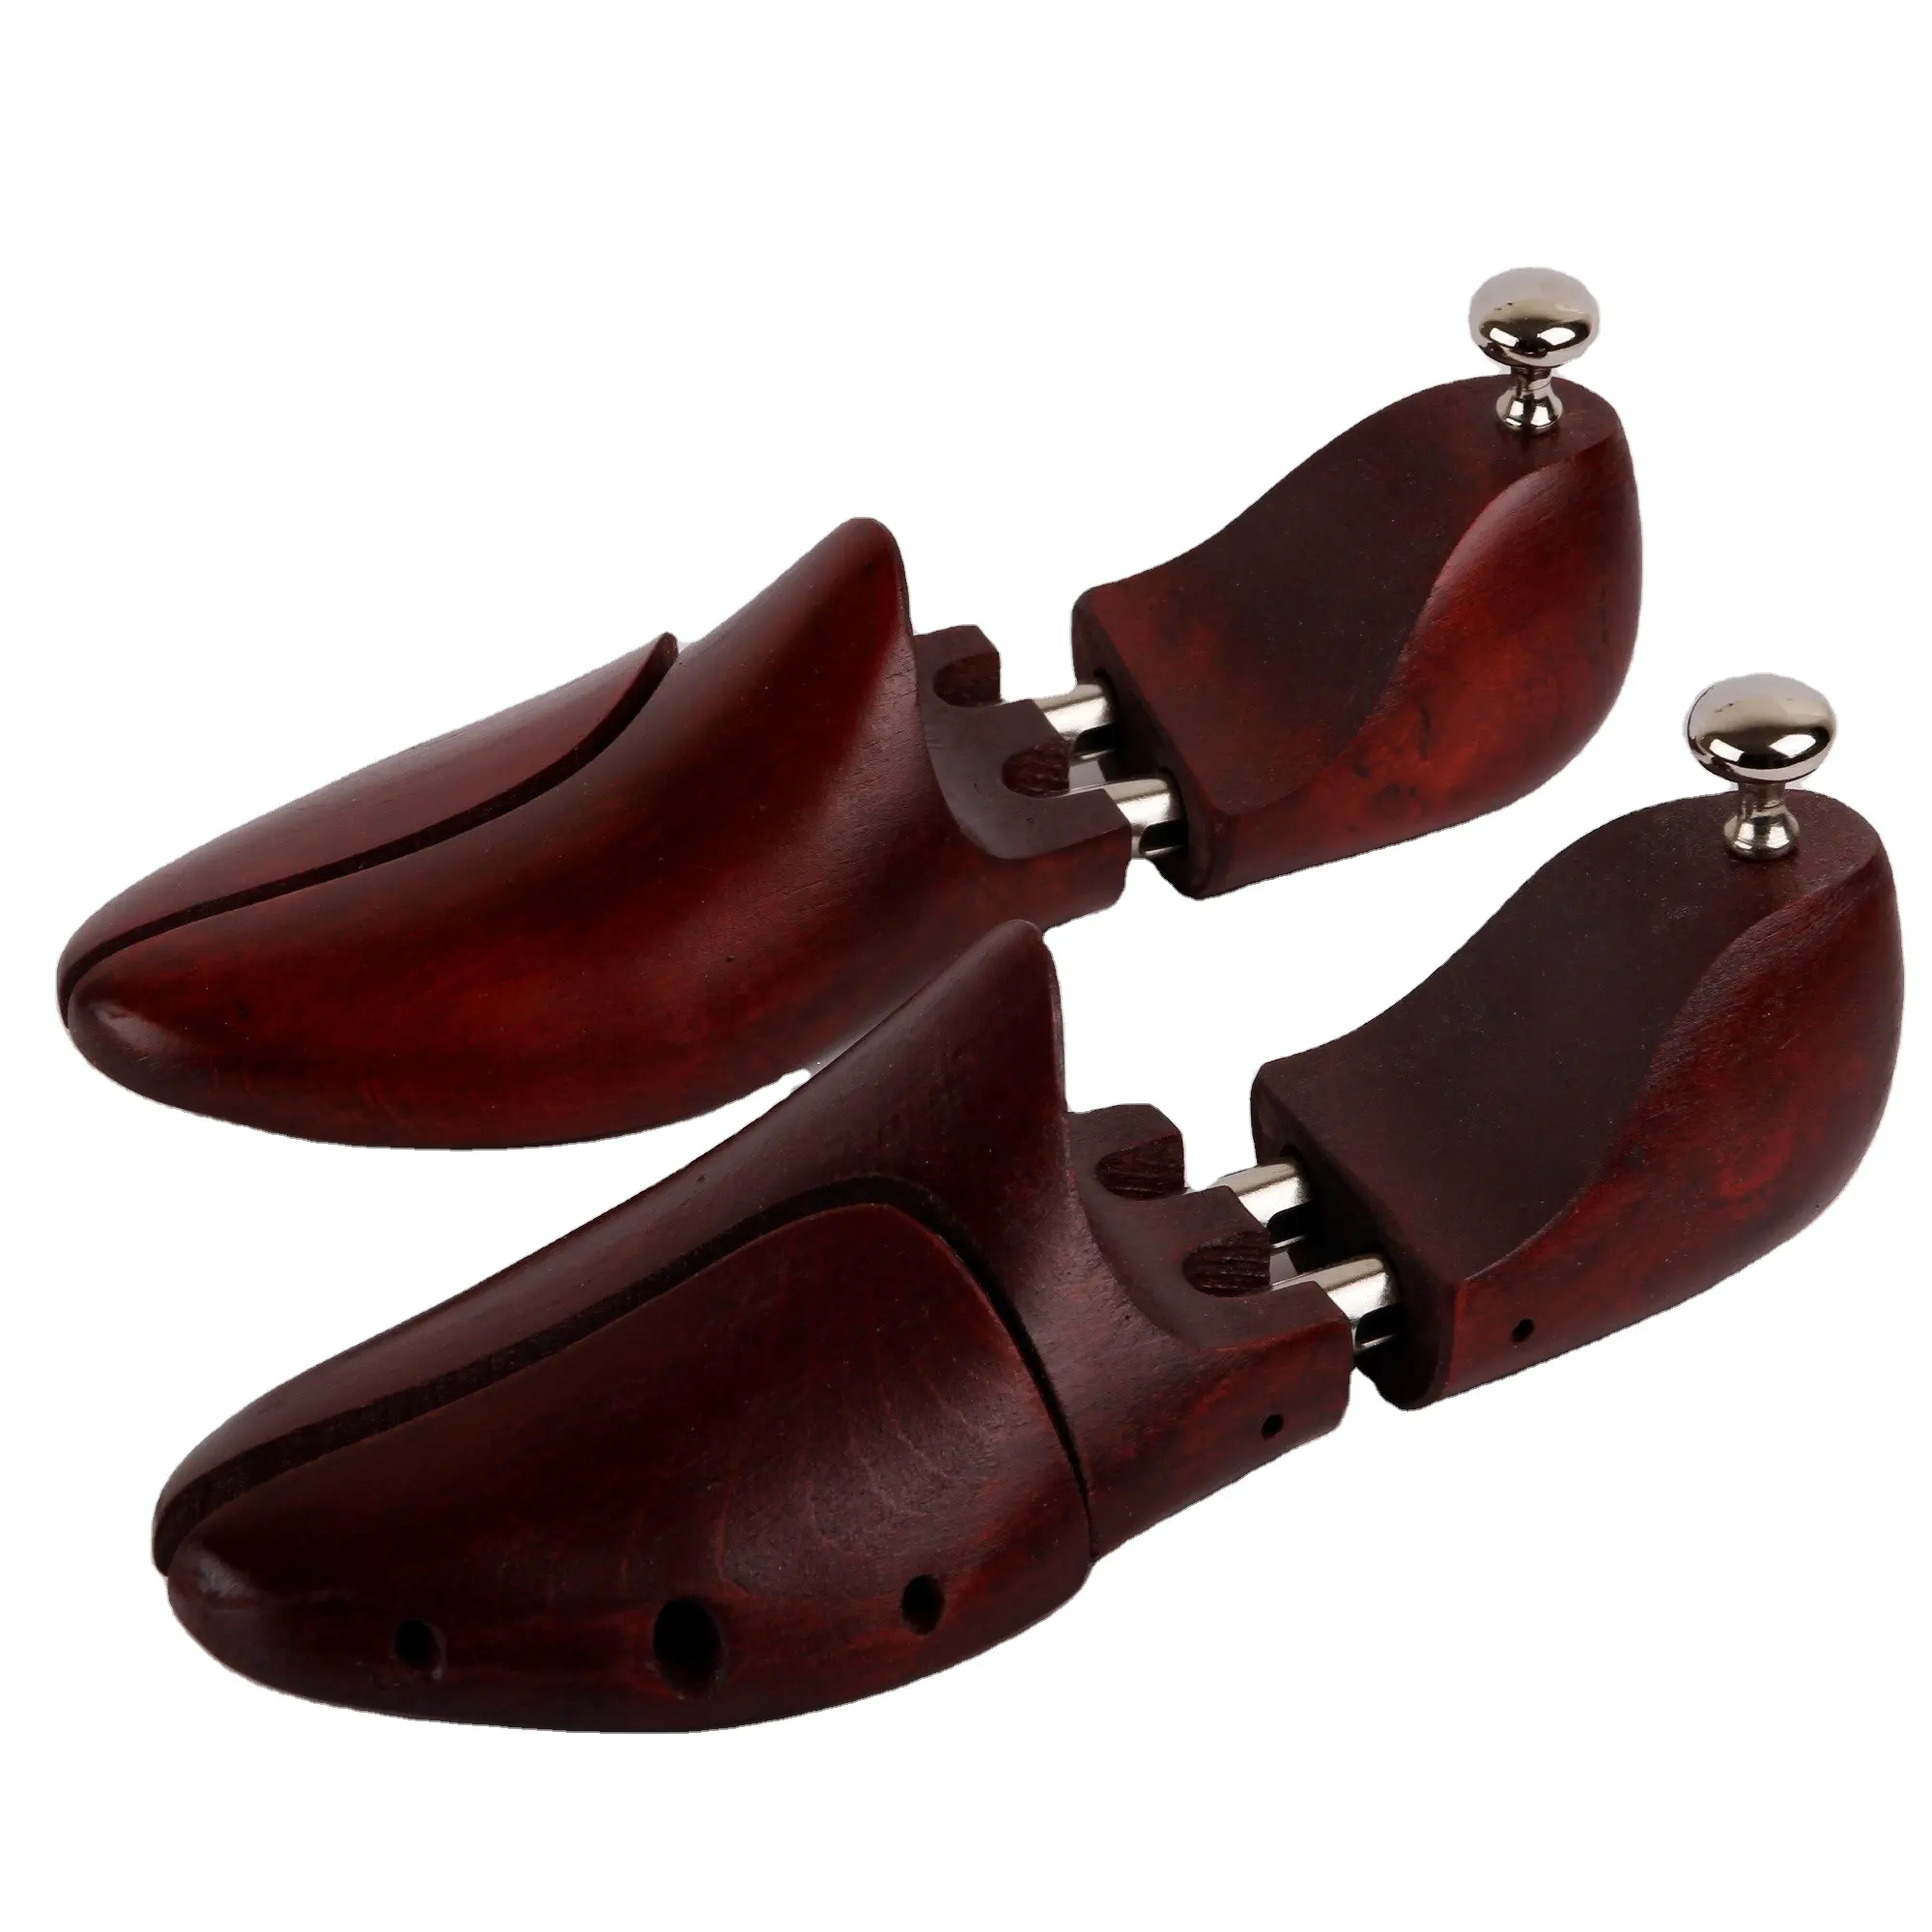 Colored Hornbeam Wood Shoe Trees - Women Men - Wooden Shoe Beech Shoe Tree With Logo And Customized Models In Different Colors